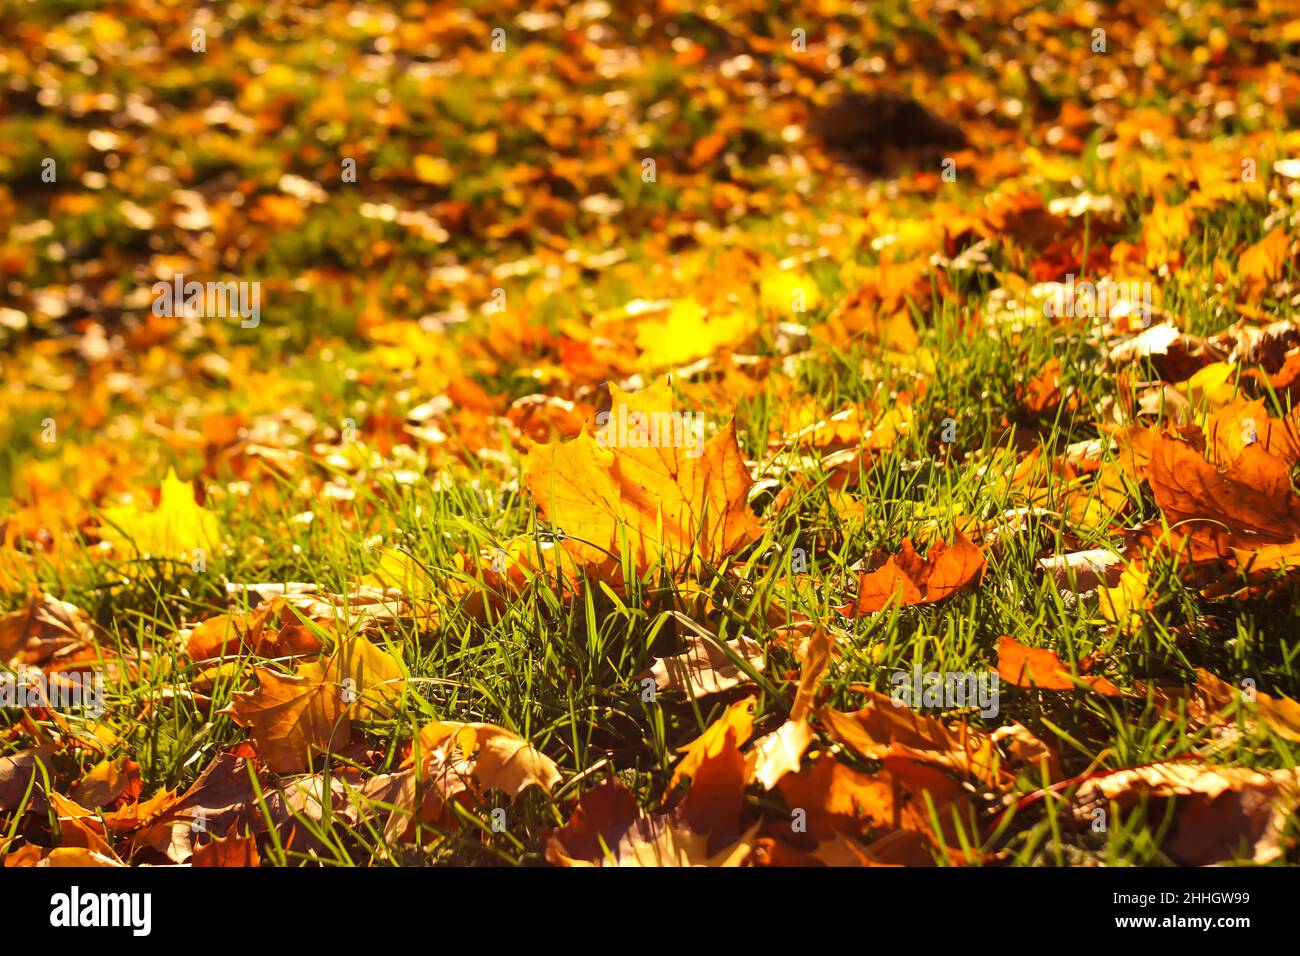 Autumn fall maple red and orange leaves in a park. Stock Photo